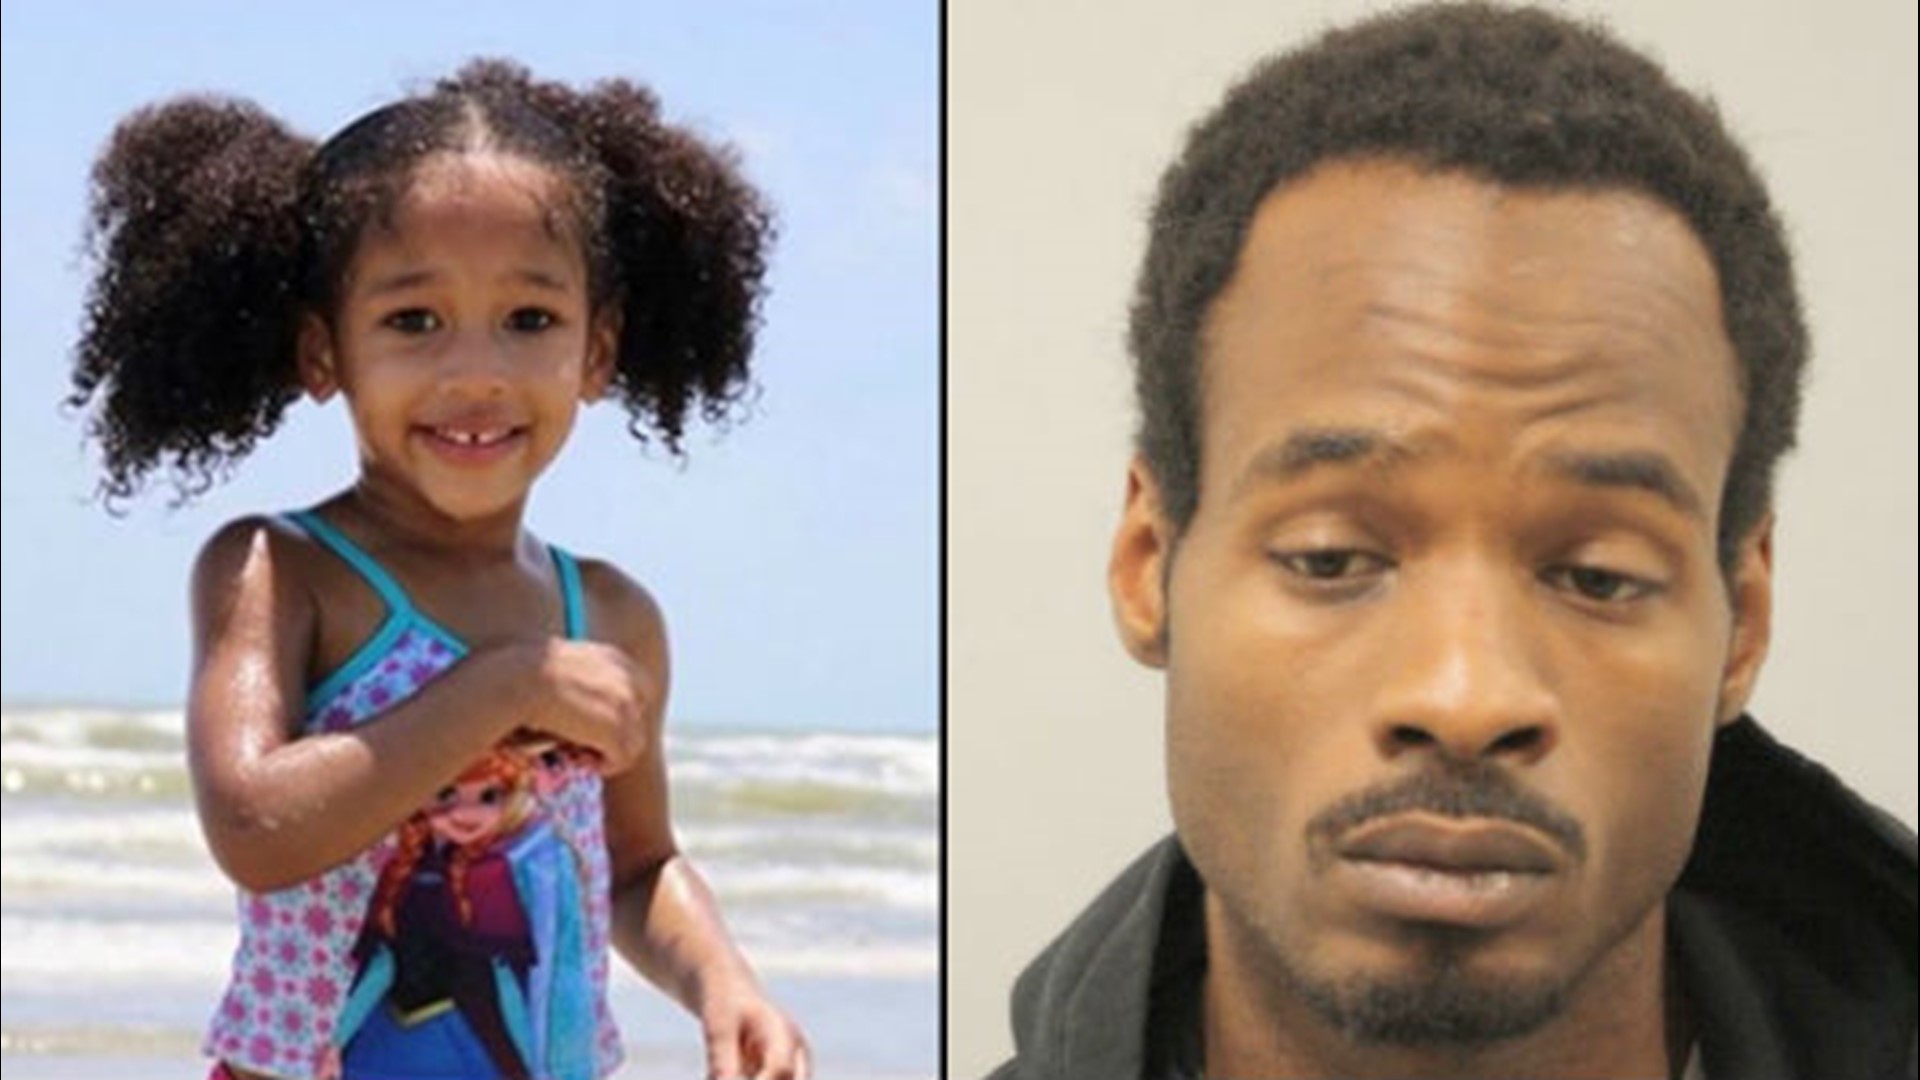 The estranged stepfather of missing 4-year-old Maleah Davis is charged with tampering with evidence.